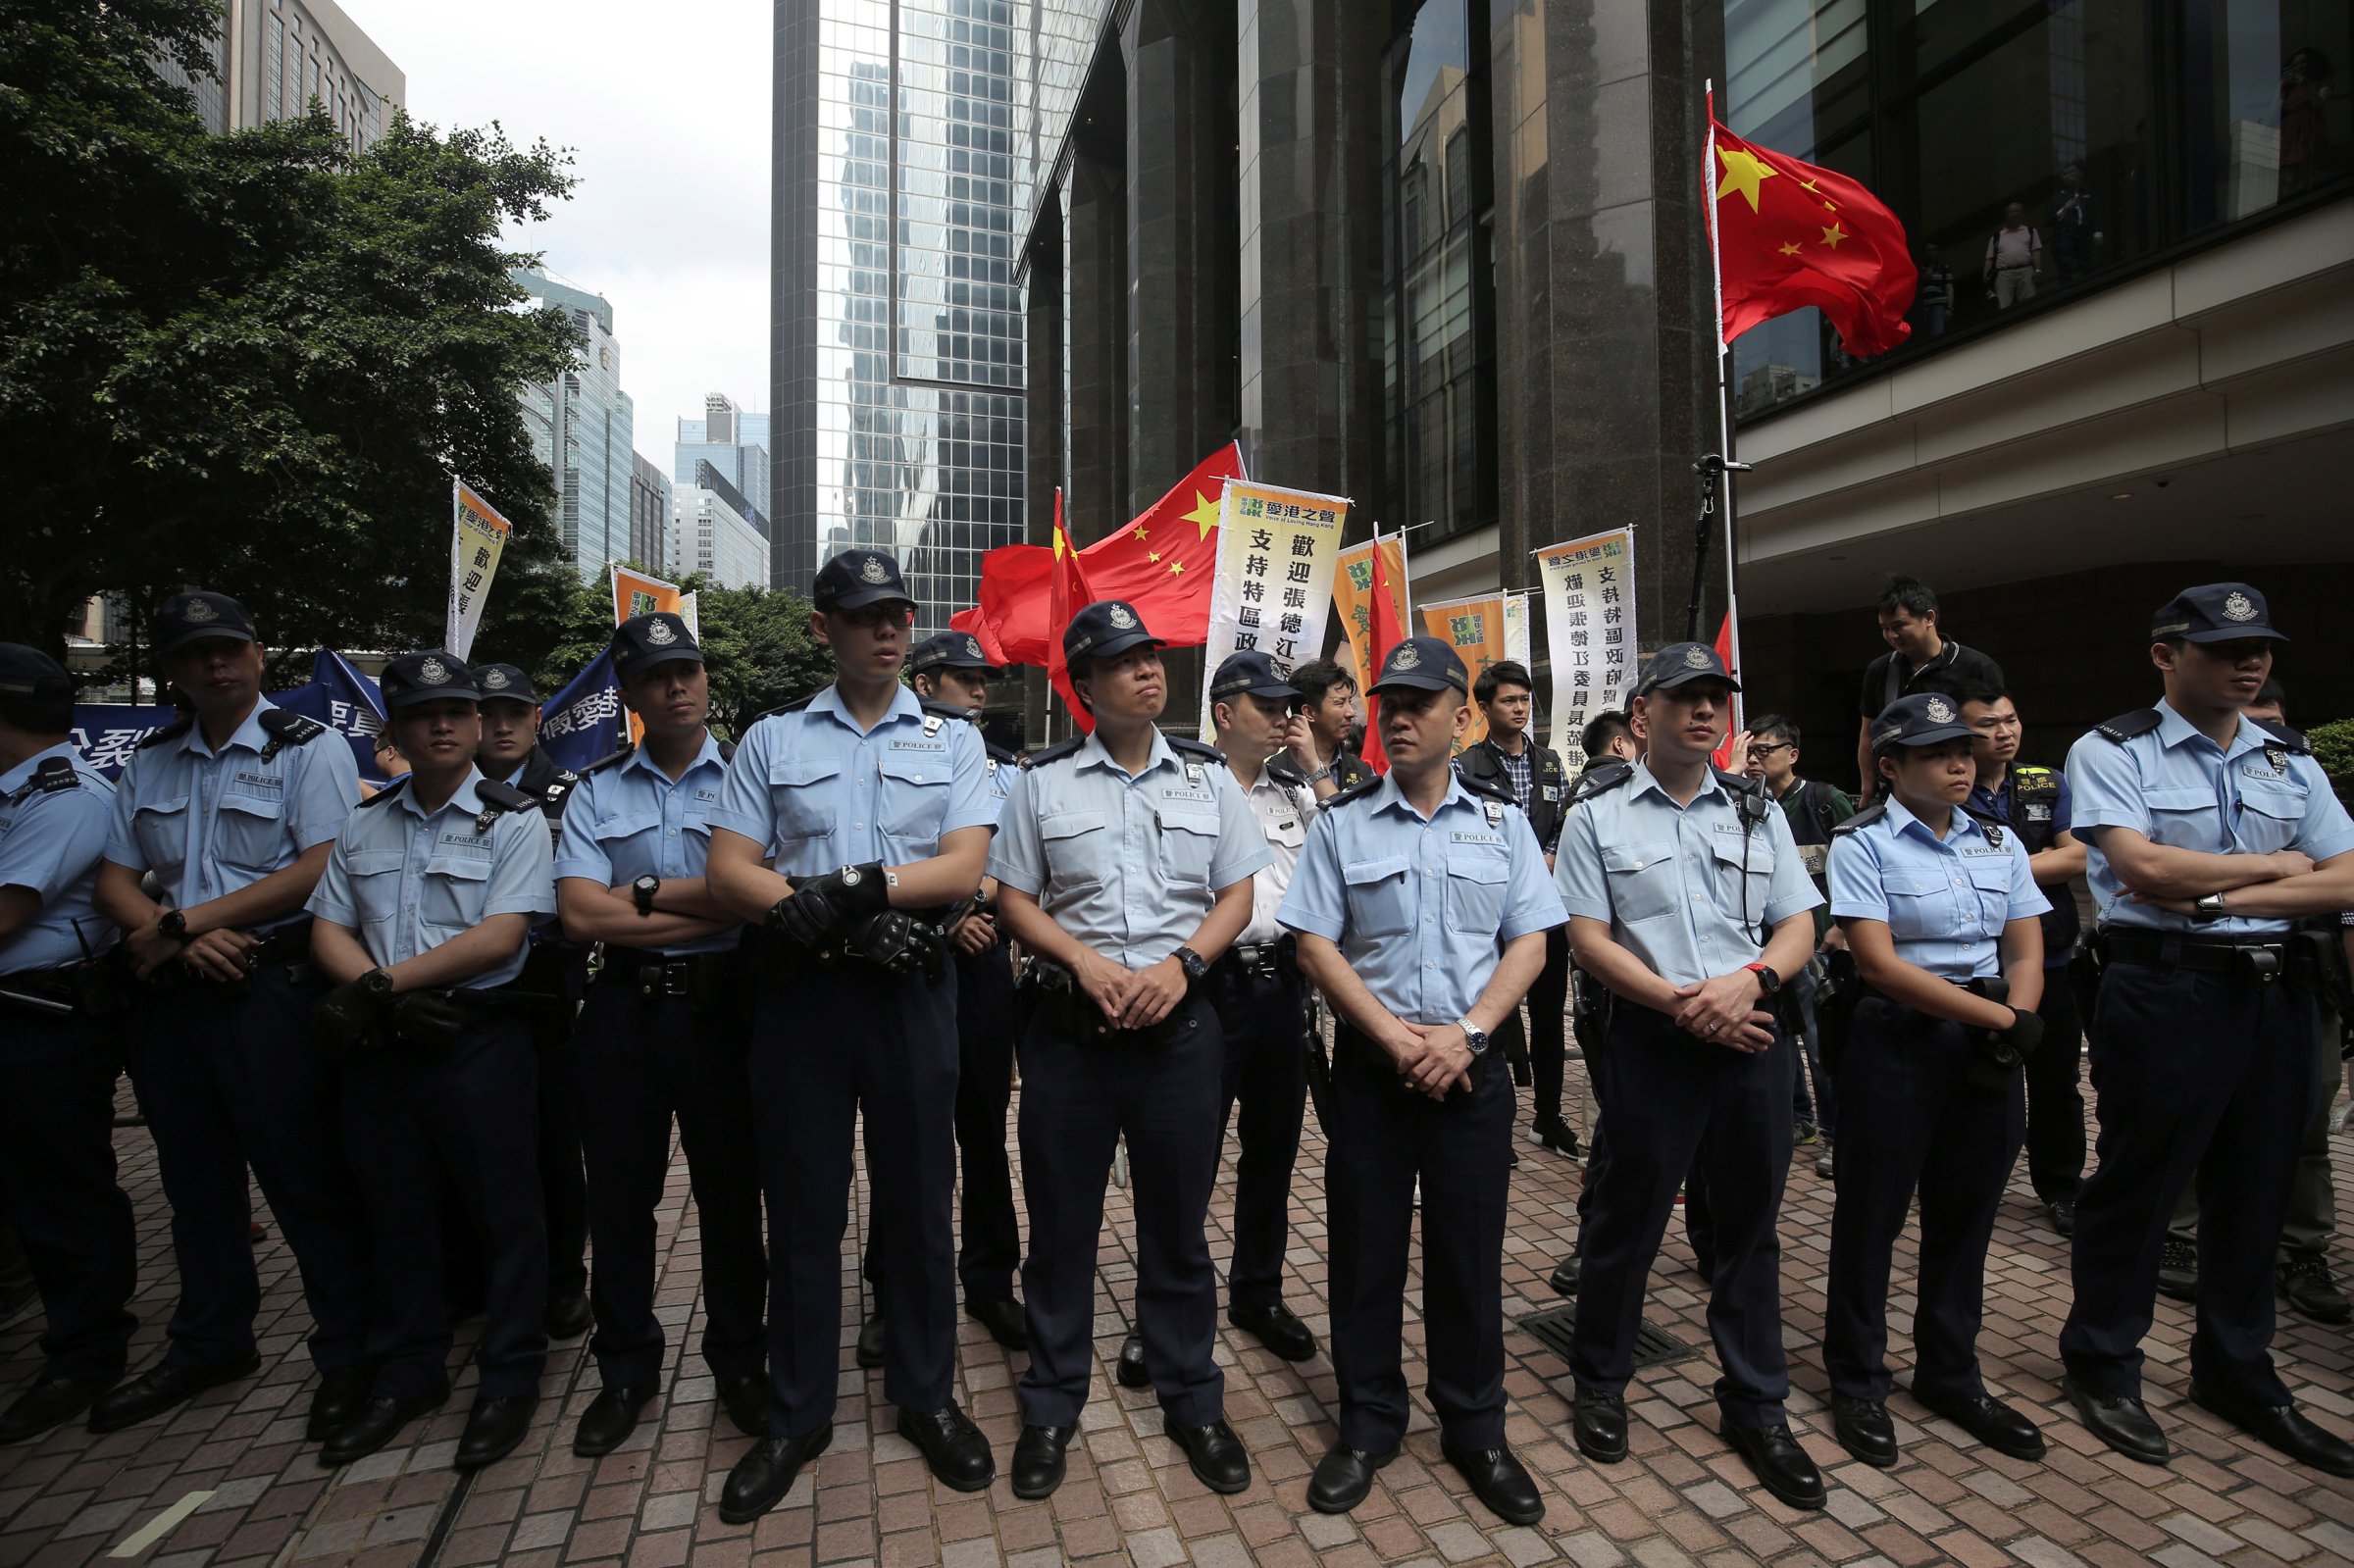 Police officers patrol in front of supporters of visiting Zhang Dejiang, the chairman of China's National People's Congress, during a protest against him in Hong Kong